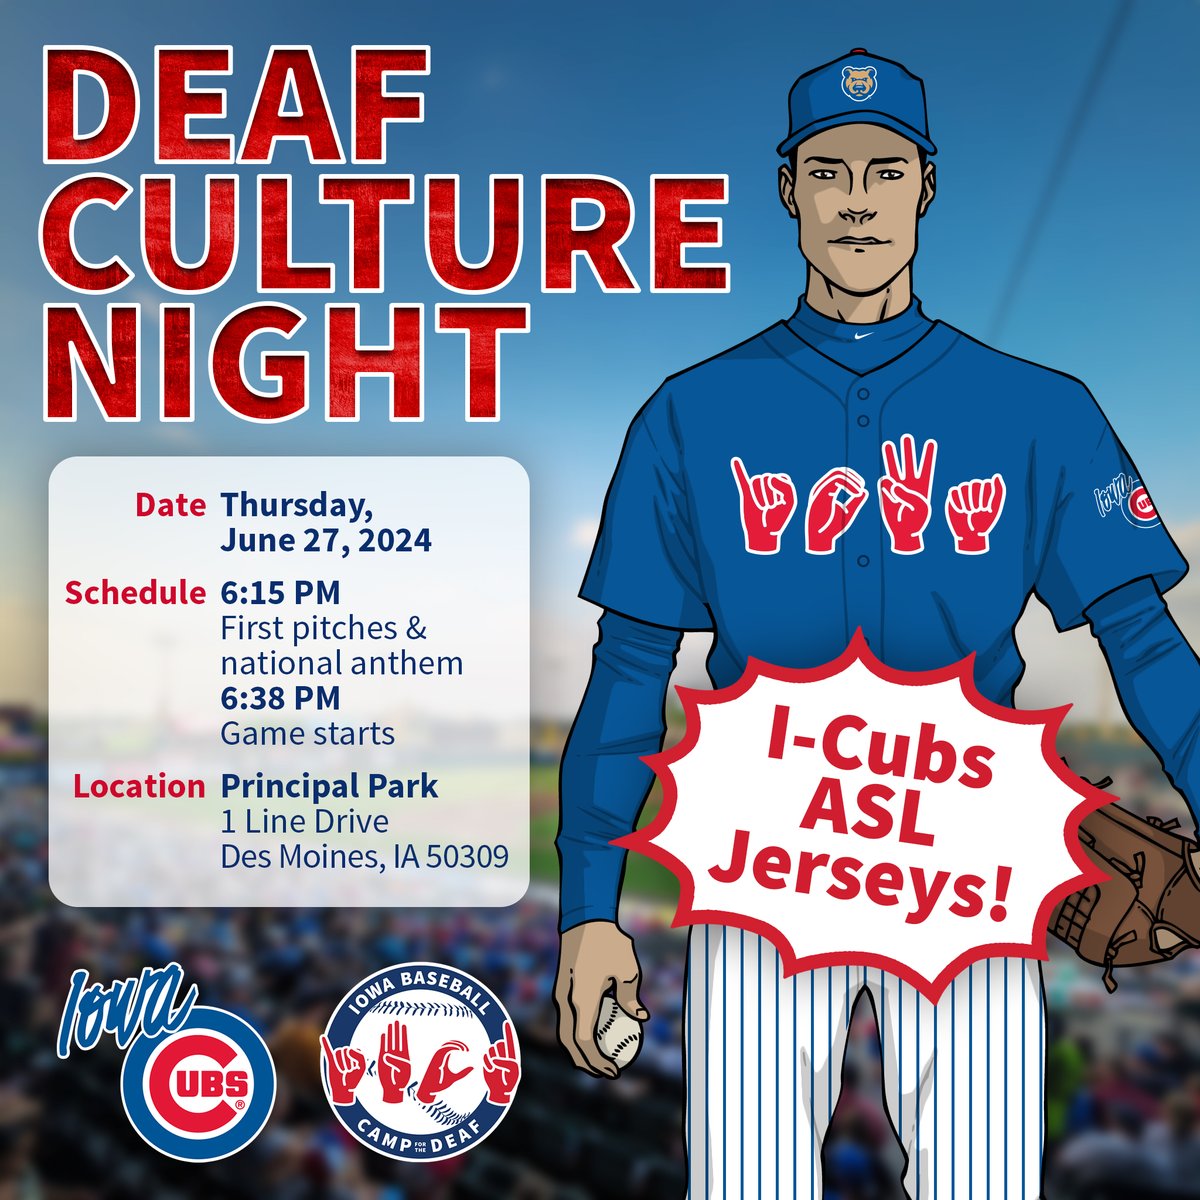 A lifelong dream is coming true! The @iowacubs will wear jerseys with IOWA in ASL to celebrate Deaf Culture with my camp, the Iowa Baseball Camp for the Deaf (IBCD), on June 27th! These jerseys will be auctioned to benefit IBCD. Link - milb.com/iowa/news/iowa… #MilB #Cubs #Deaf